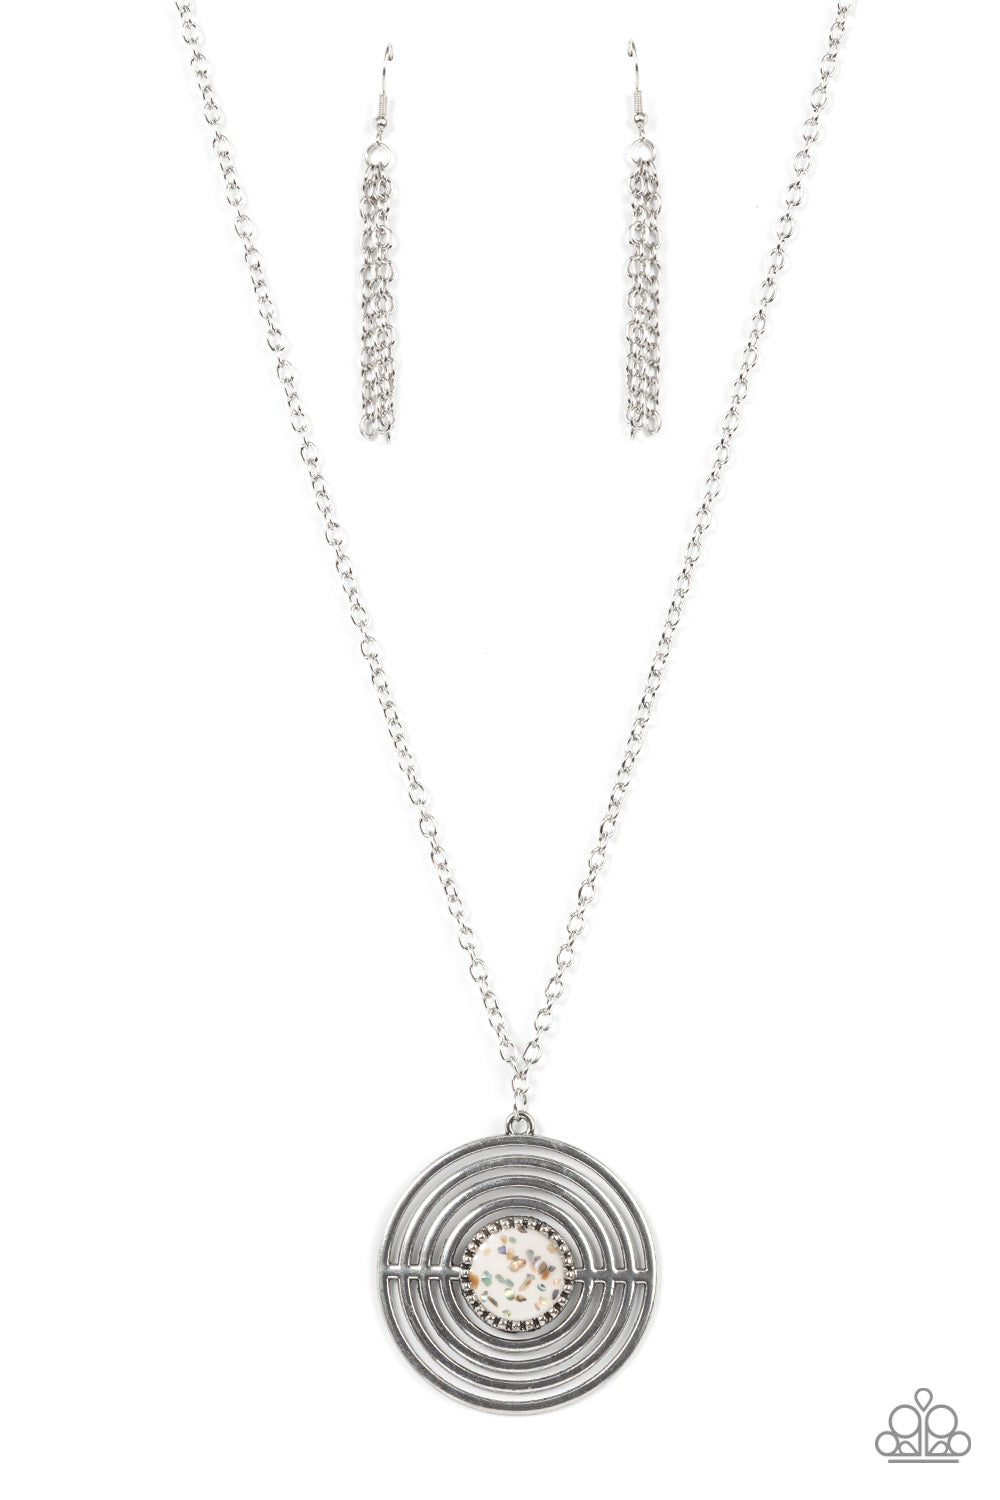 Targeted Tranquility White Necklace Paparazzi